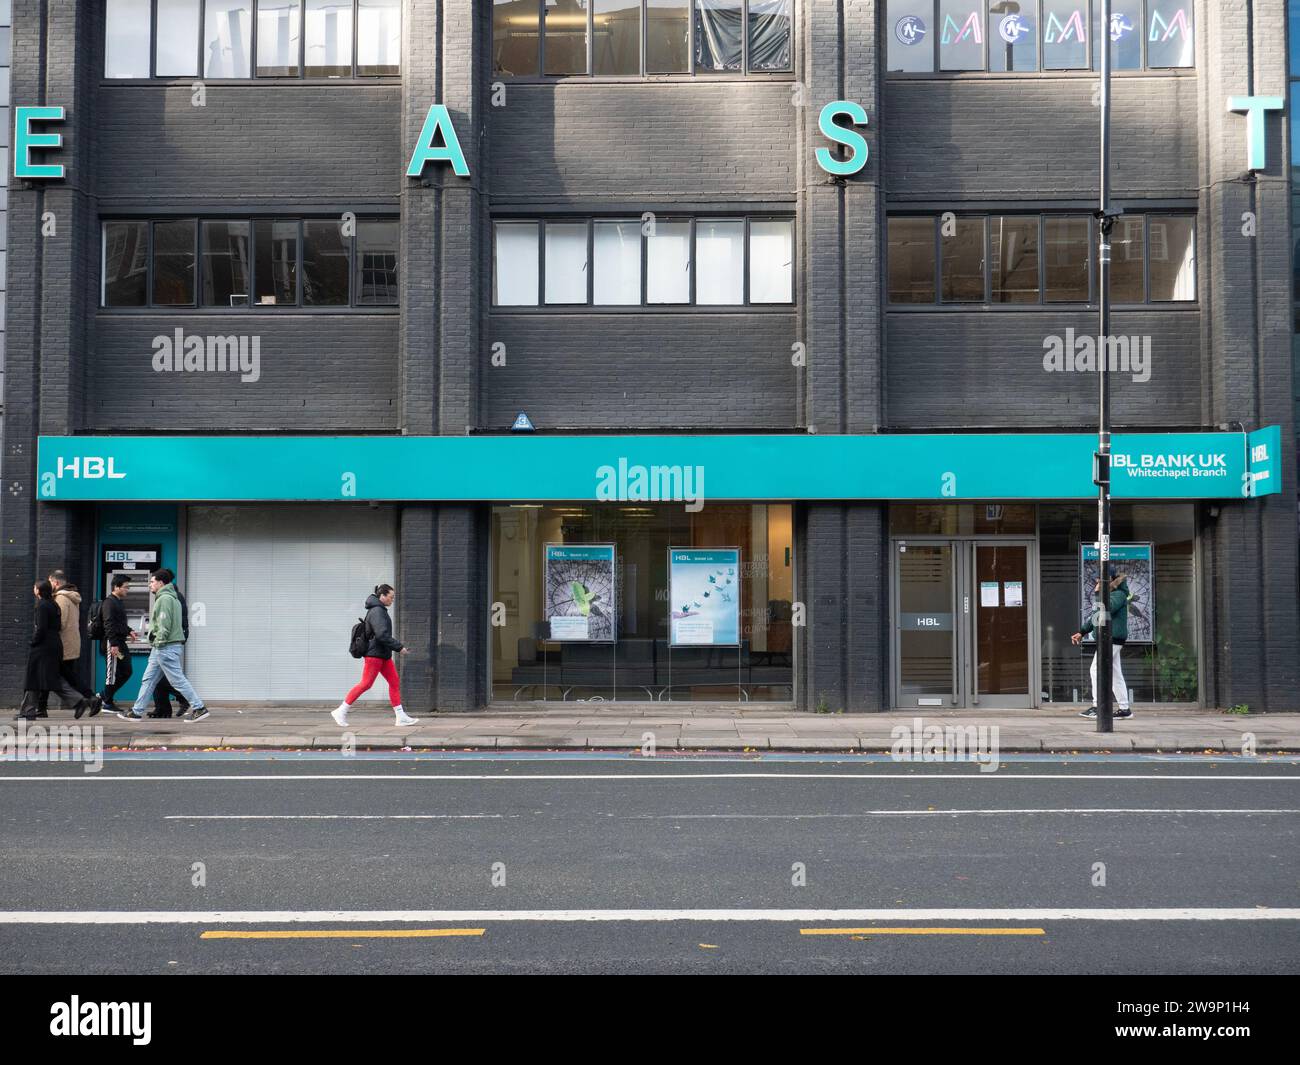 London based branch of  the Pakistan  Habib Bank Limited abbreviated as HBL situated in Whitechapel London, UK Stock Photo